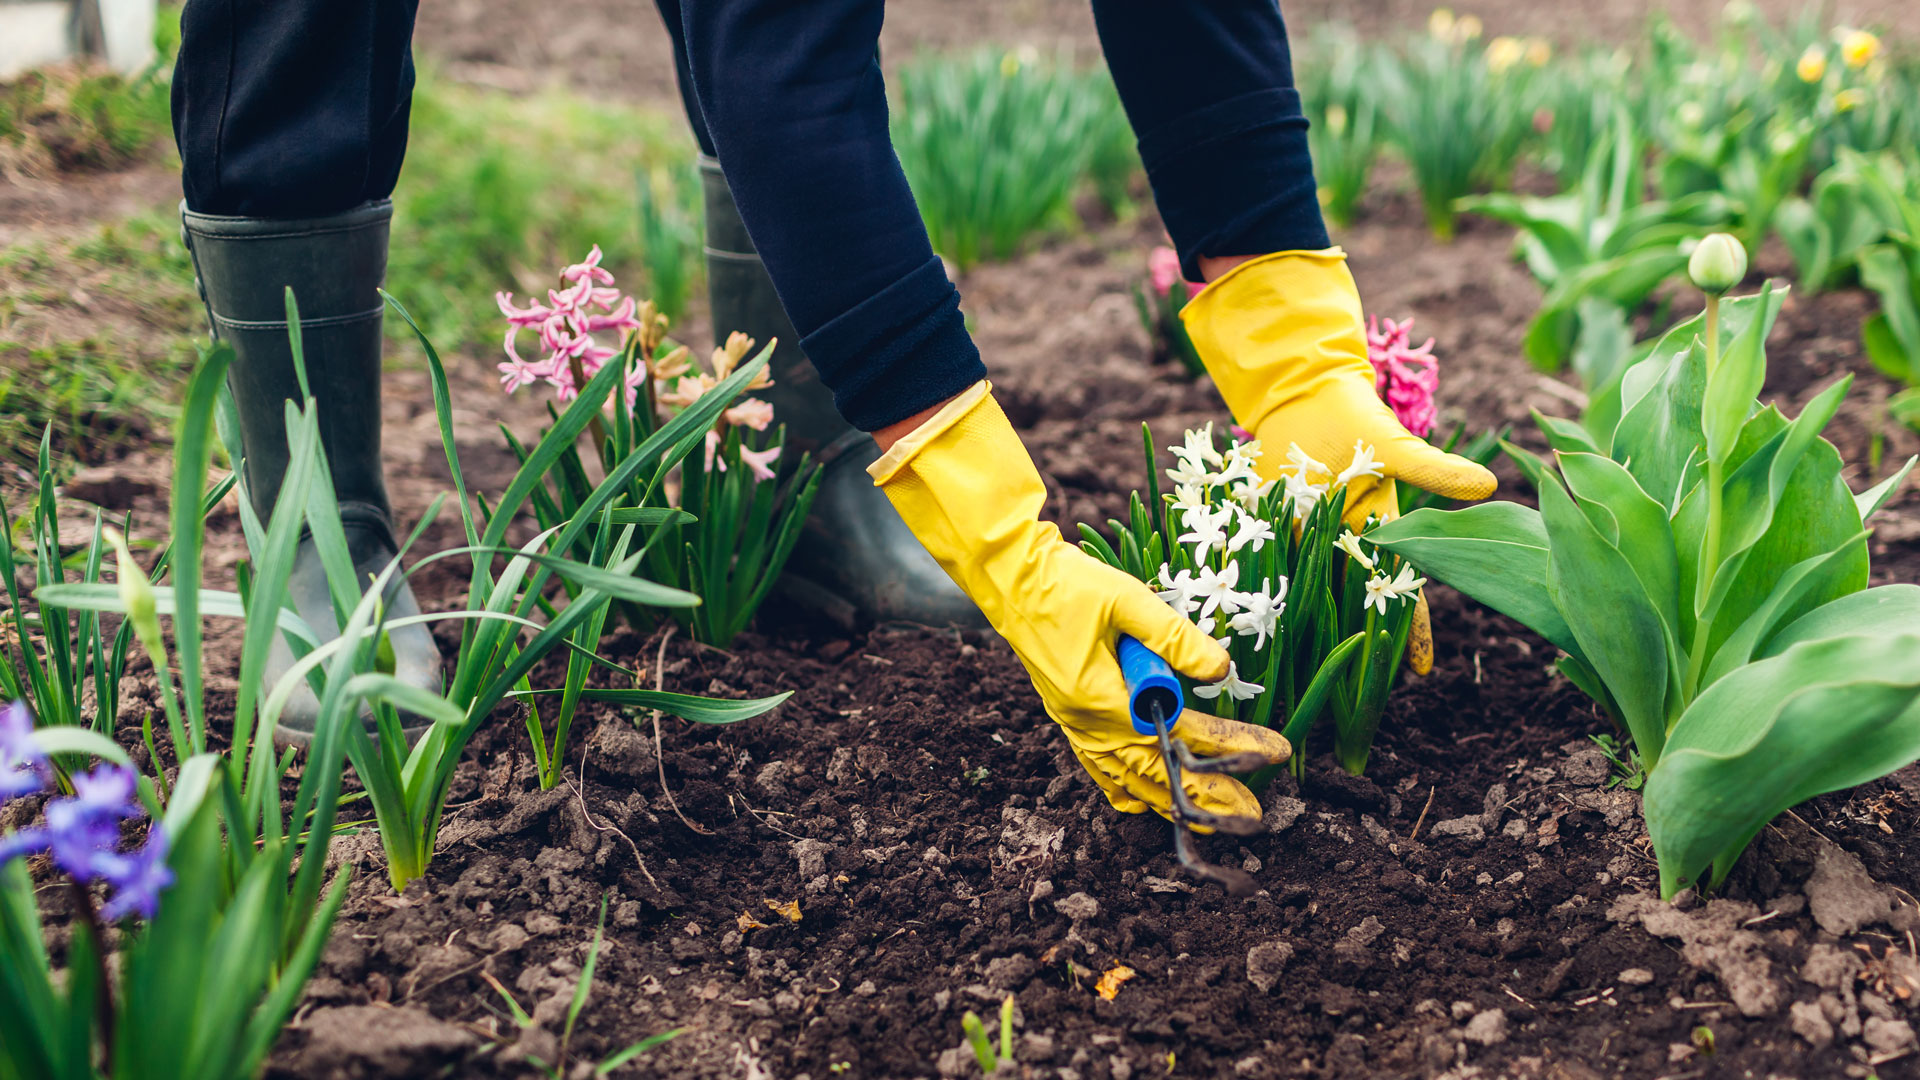 Close up of hands in yellow gloves planting a white flower in a garden.